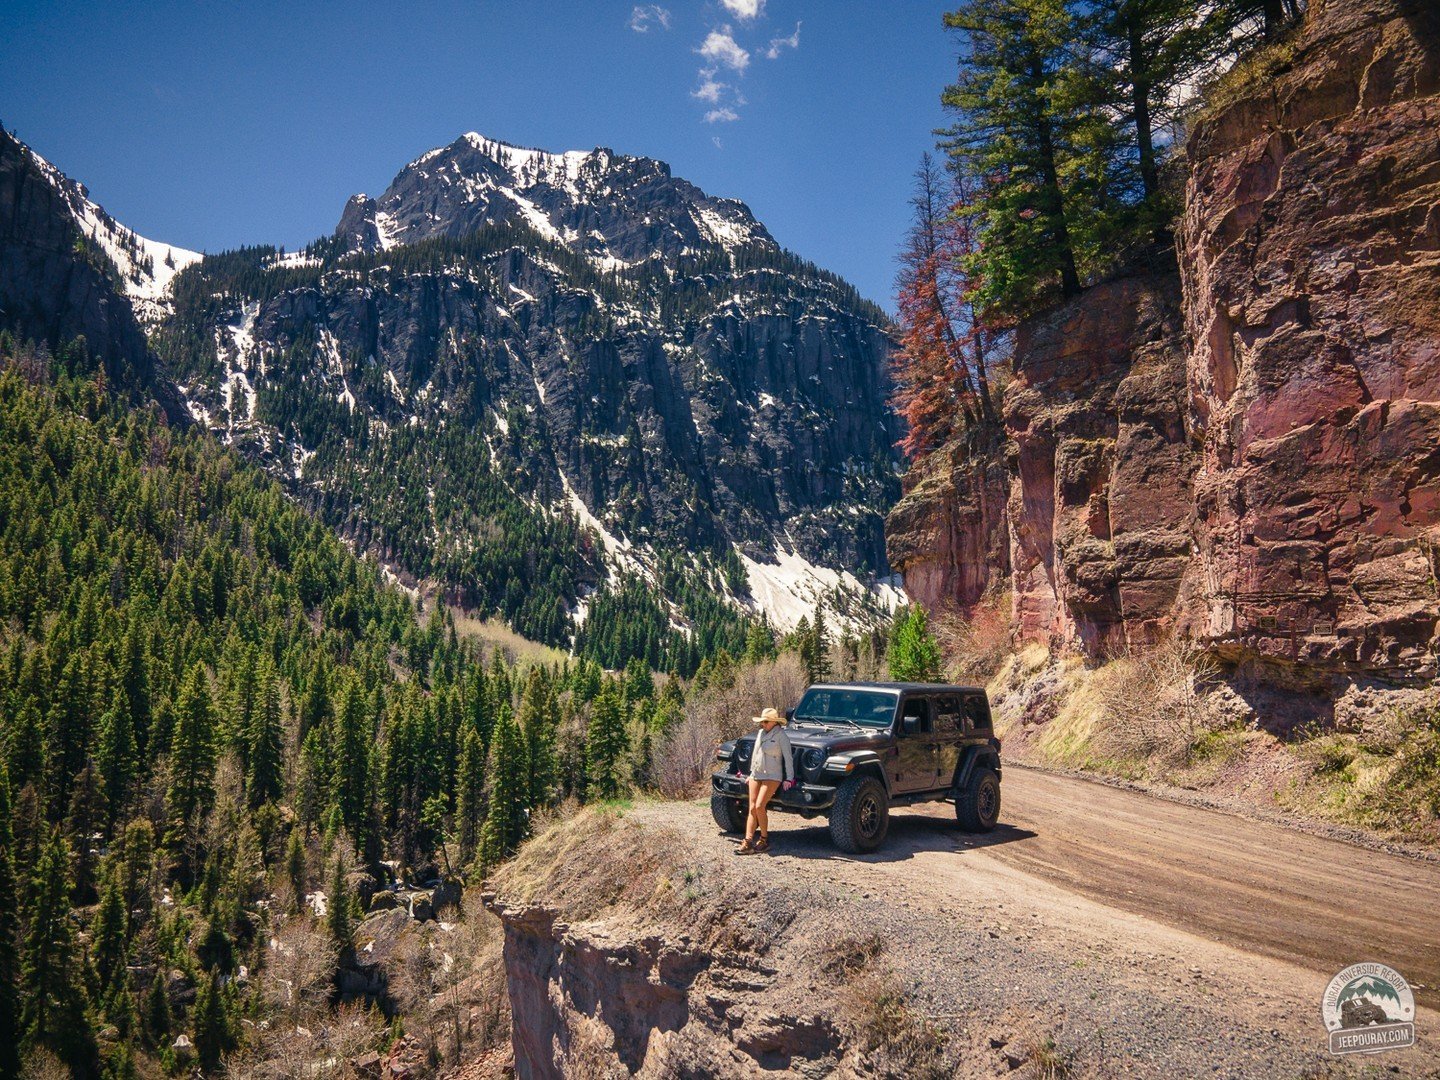 Sunday-Funday at Jeep Ouray.  Take advantage of our $249 per day rate until the end of May and enjoy early season exploring. 

https://www.ourayriversideresort.com/jeepouray

#ouray #ouraycolorado #jeeplife #visitcolorado